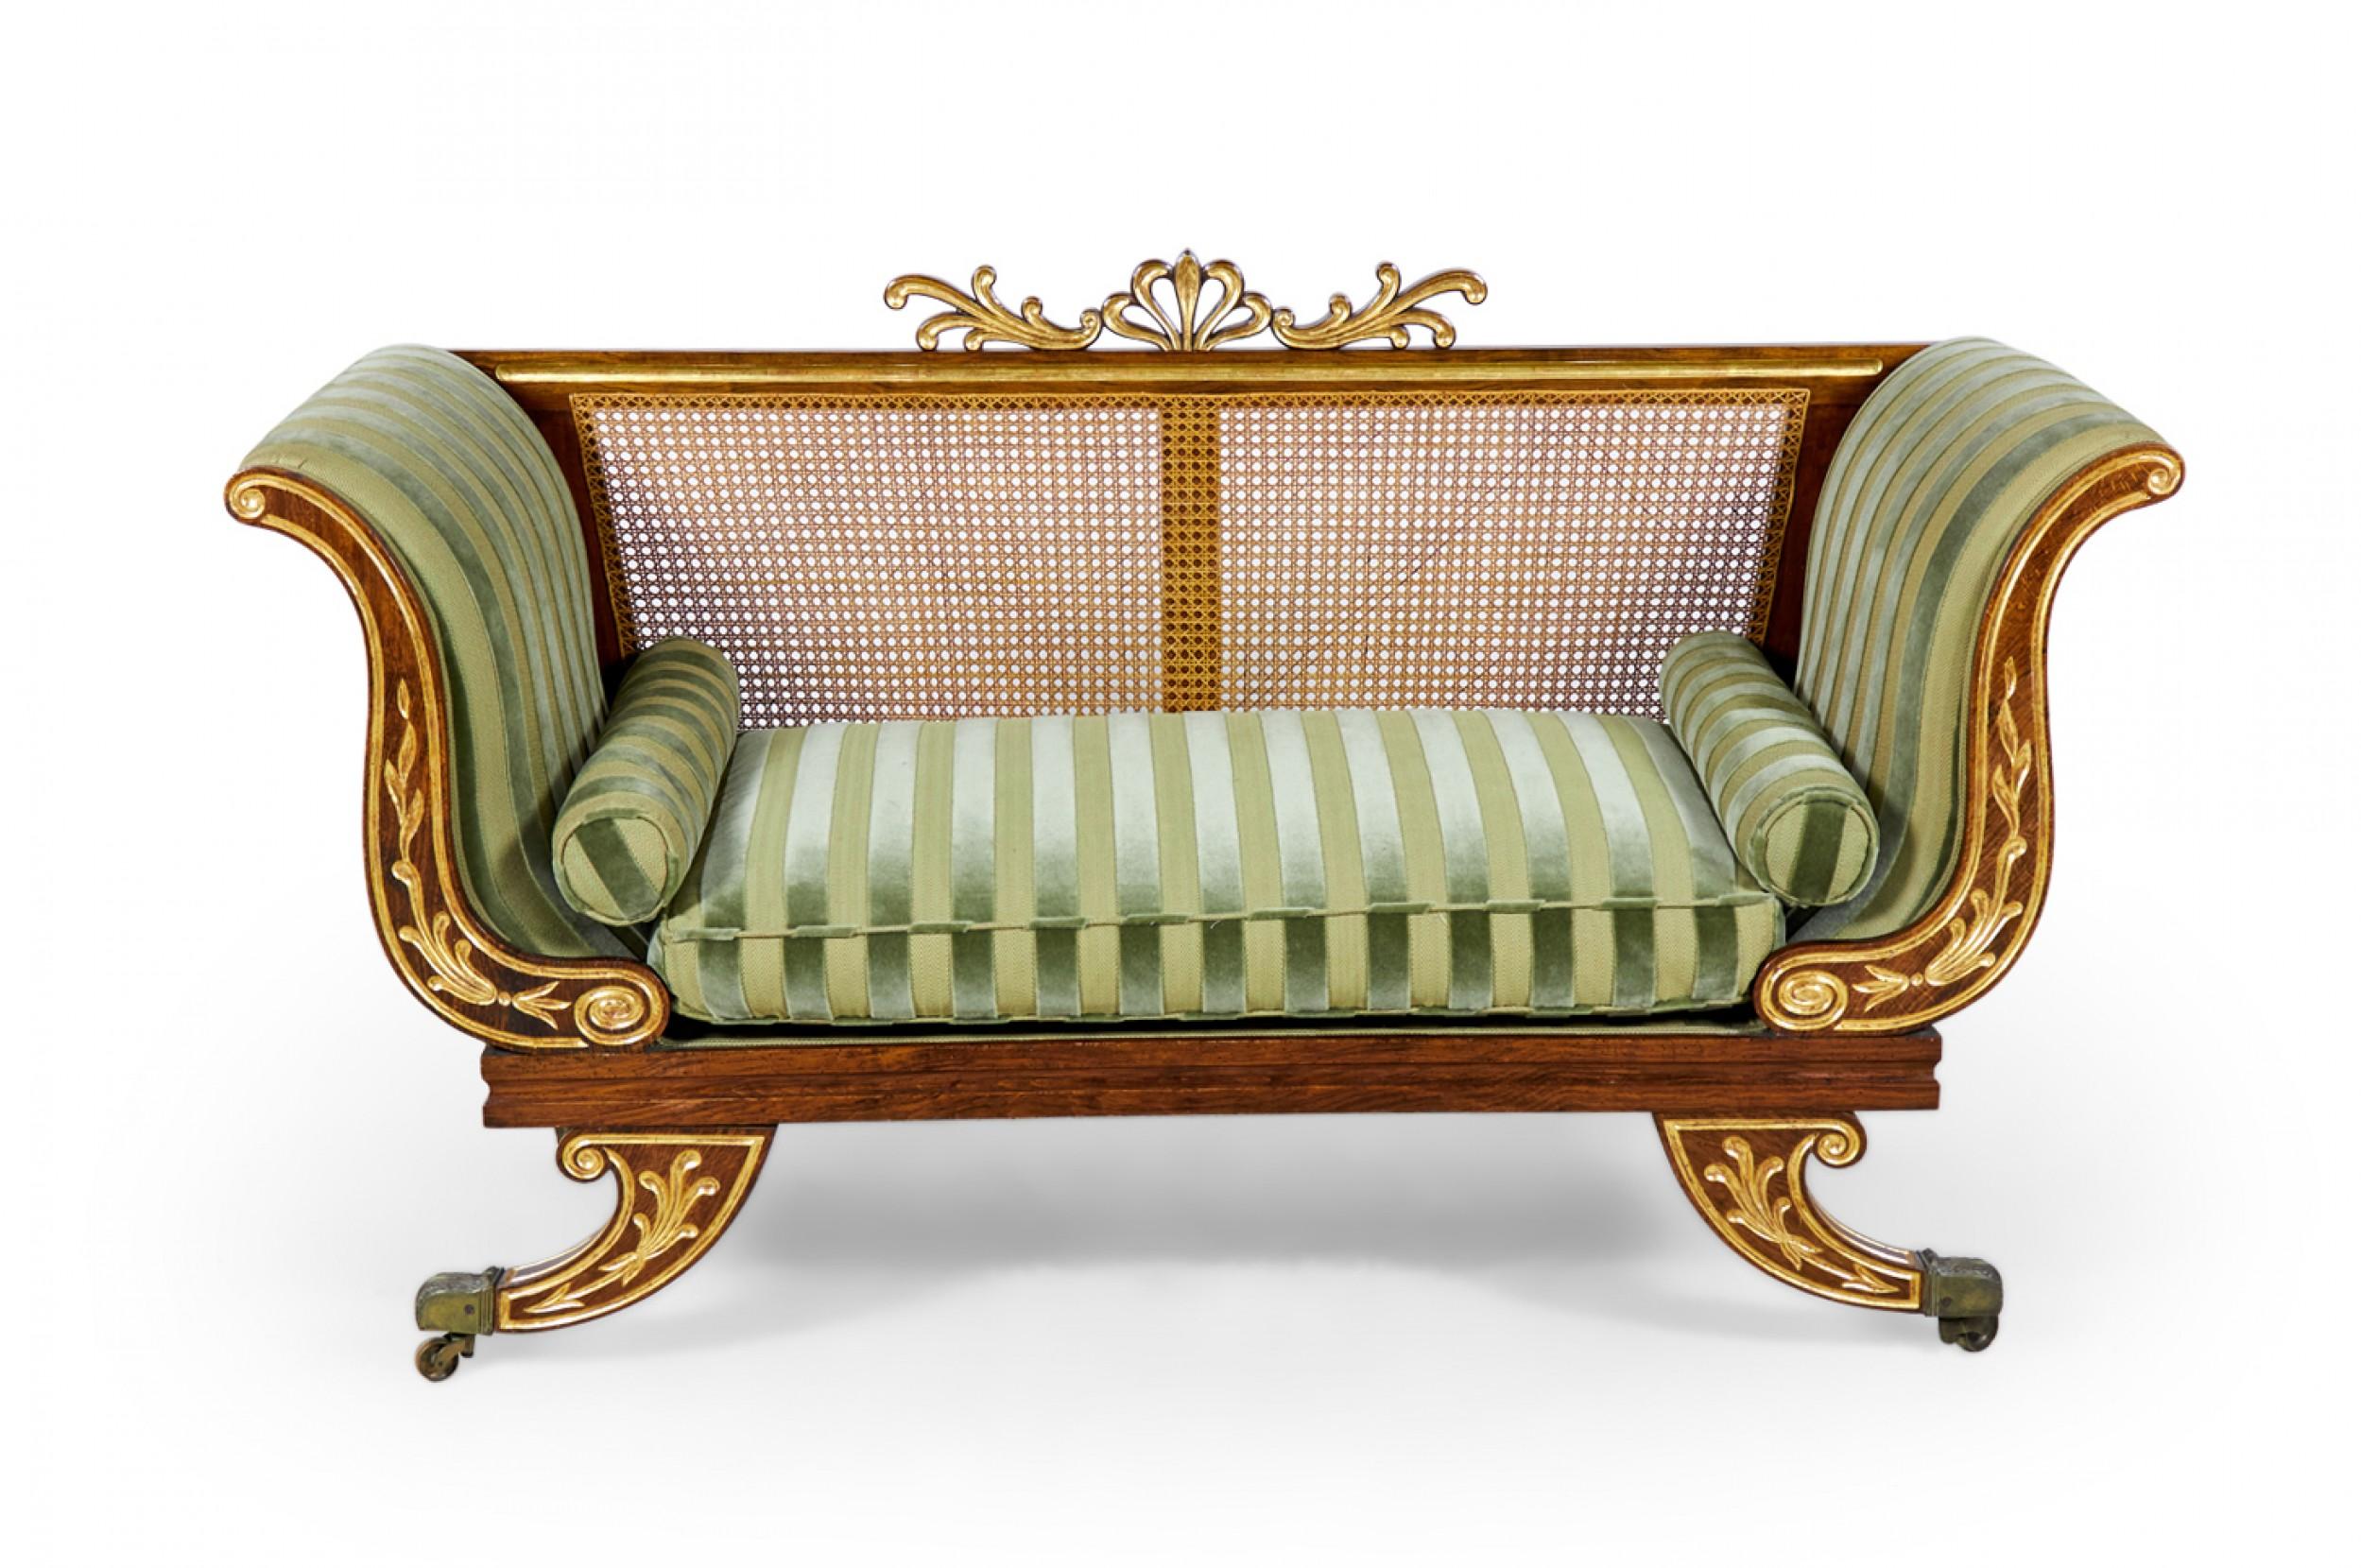 Pair of English Regency faux painted rosewood loveseats with parcel gilt ornaments, removable caned backs with gilt anthemion top crests, and mint green striped upholstery, resting on four curved legs ending in brass casters. (Priced as pair).